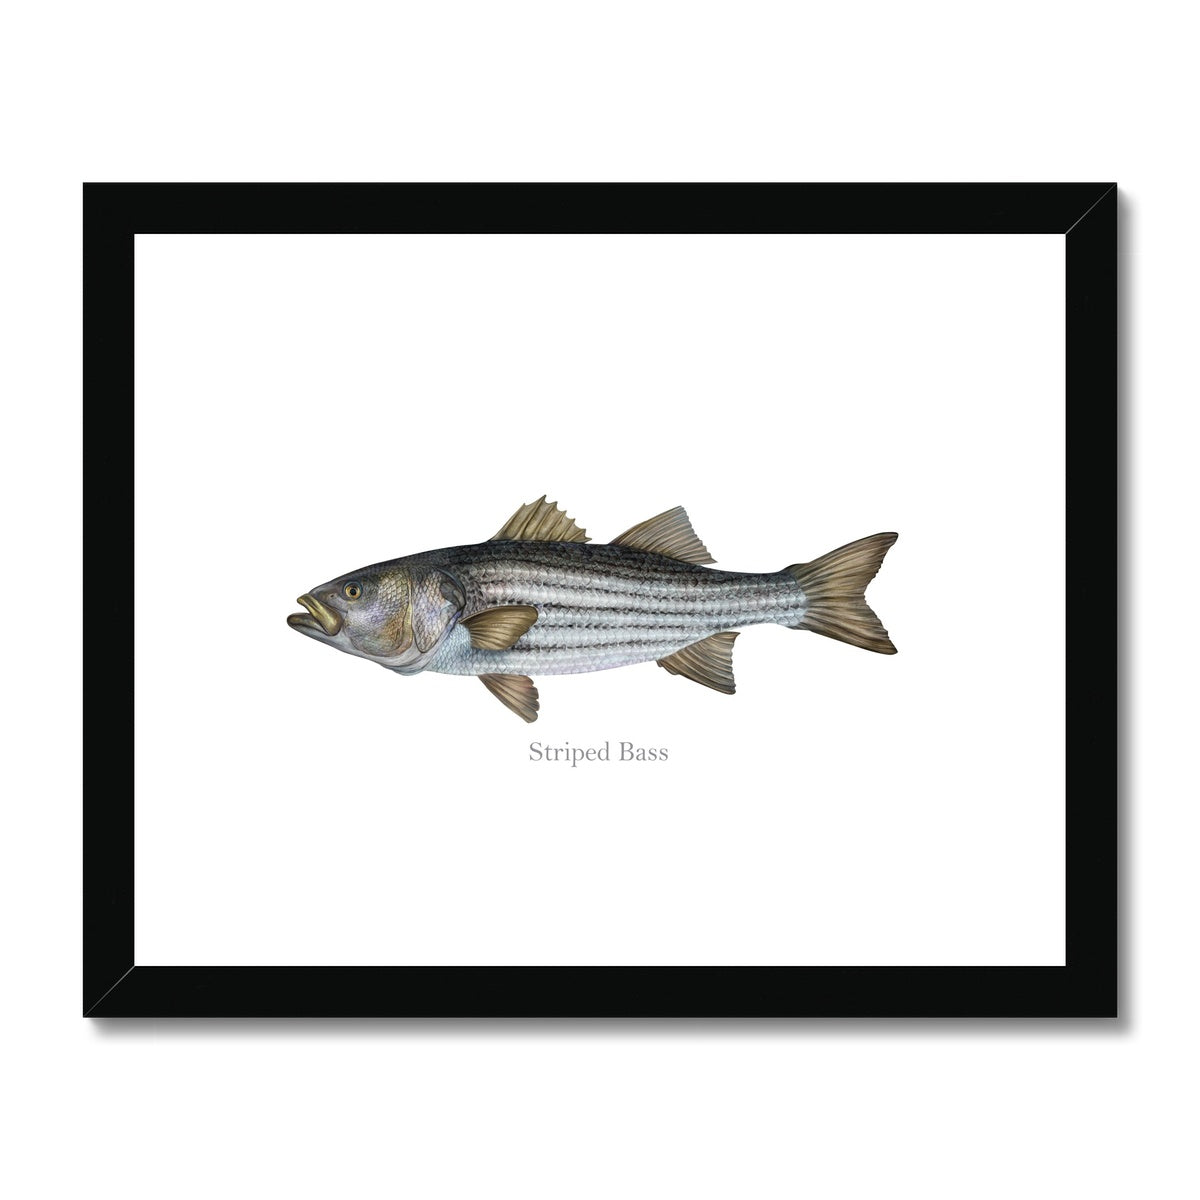 Striped Bass - Framed & Mounted Print